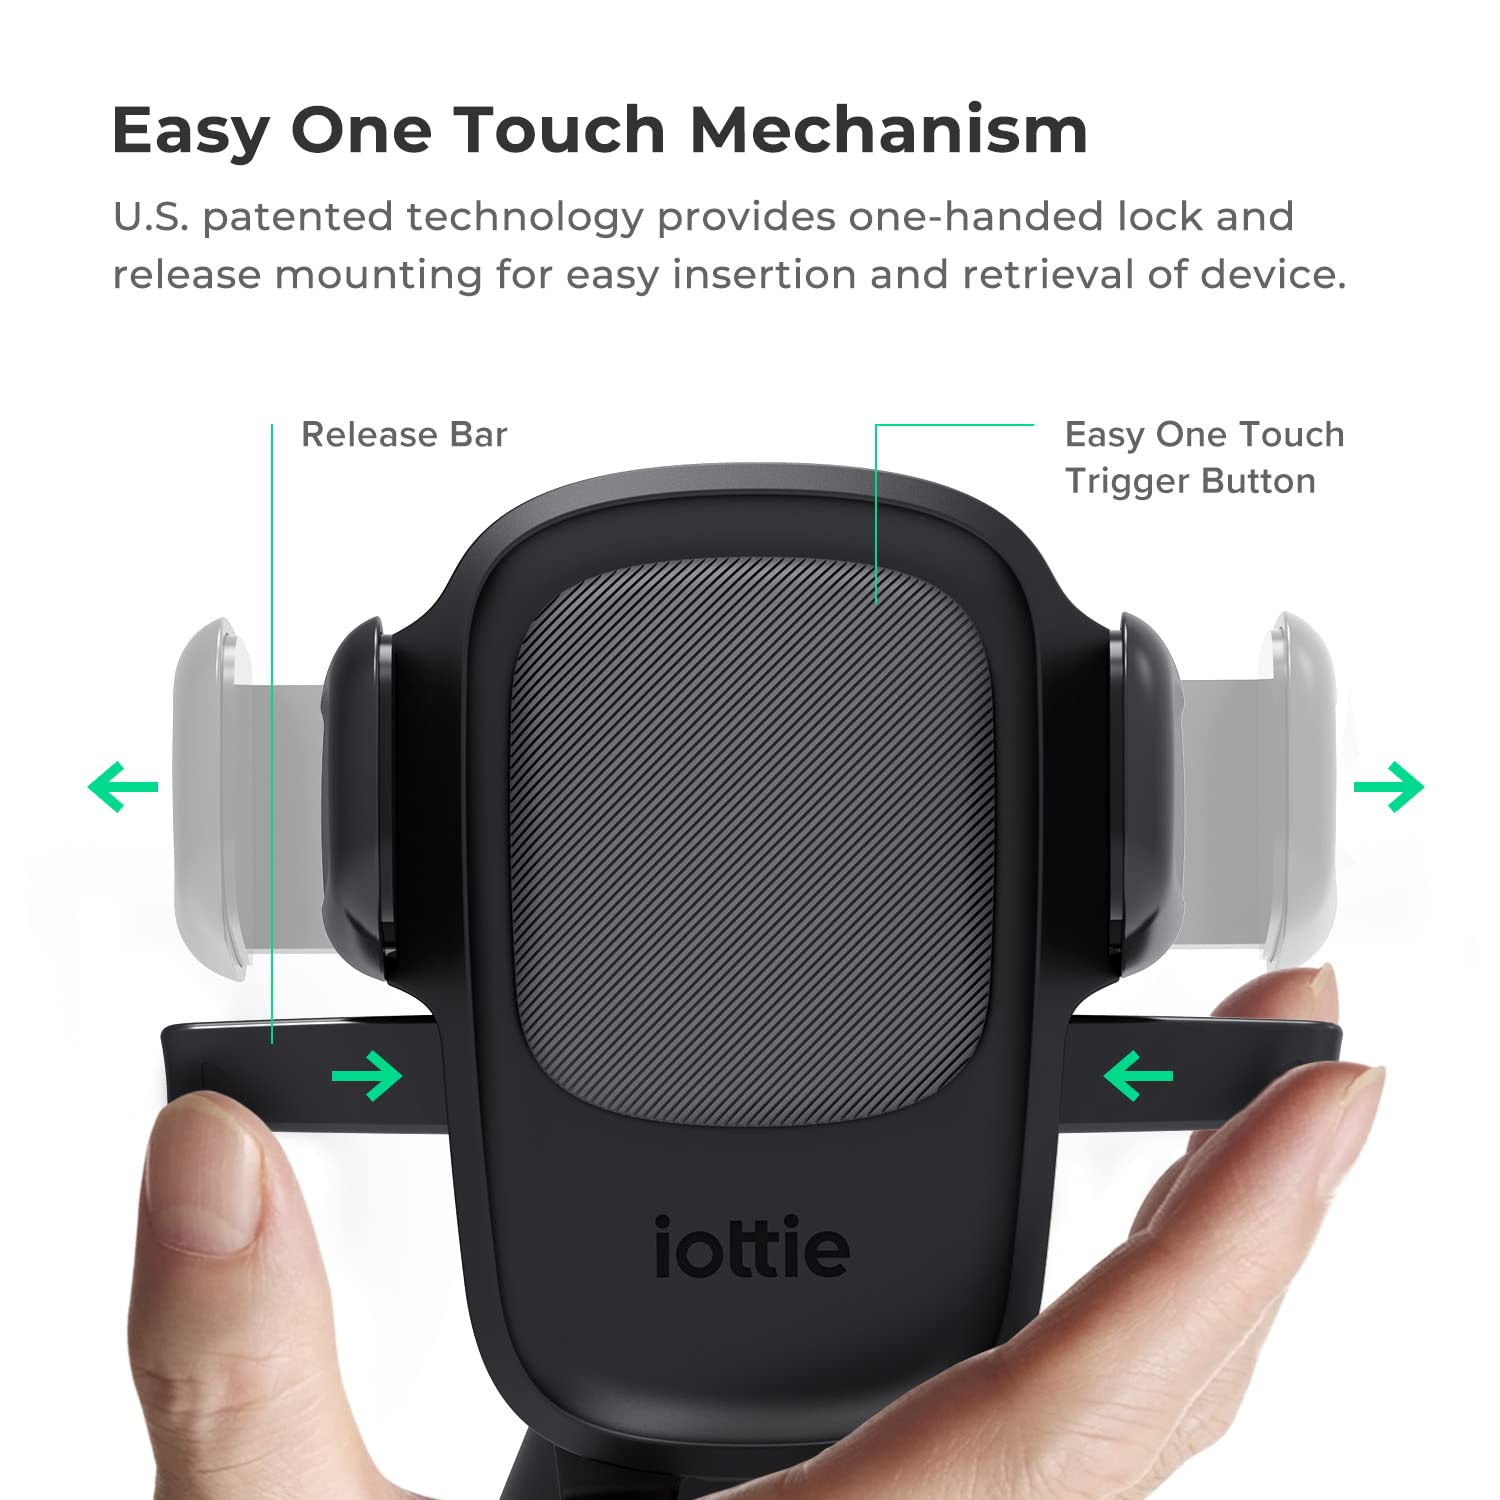 iOttie Easy One Touch 5 Air Vent & Flush Mount Combo - Universal Car Mount Phone Holder for iPhone, Google, Samsung, Moto, Huawei, Nokia, LG, and all other Smartphones